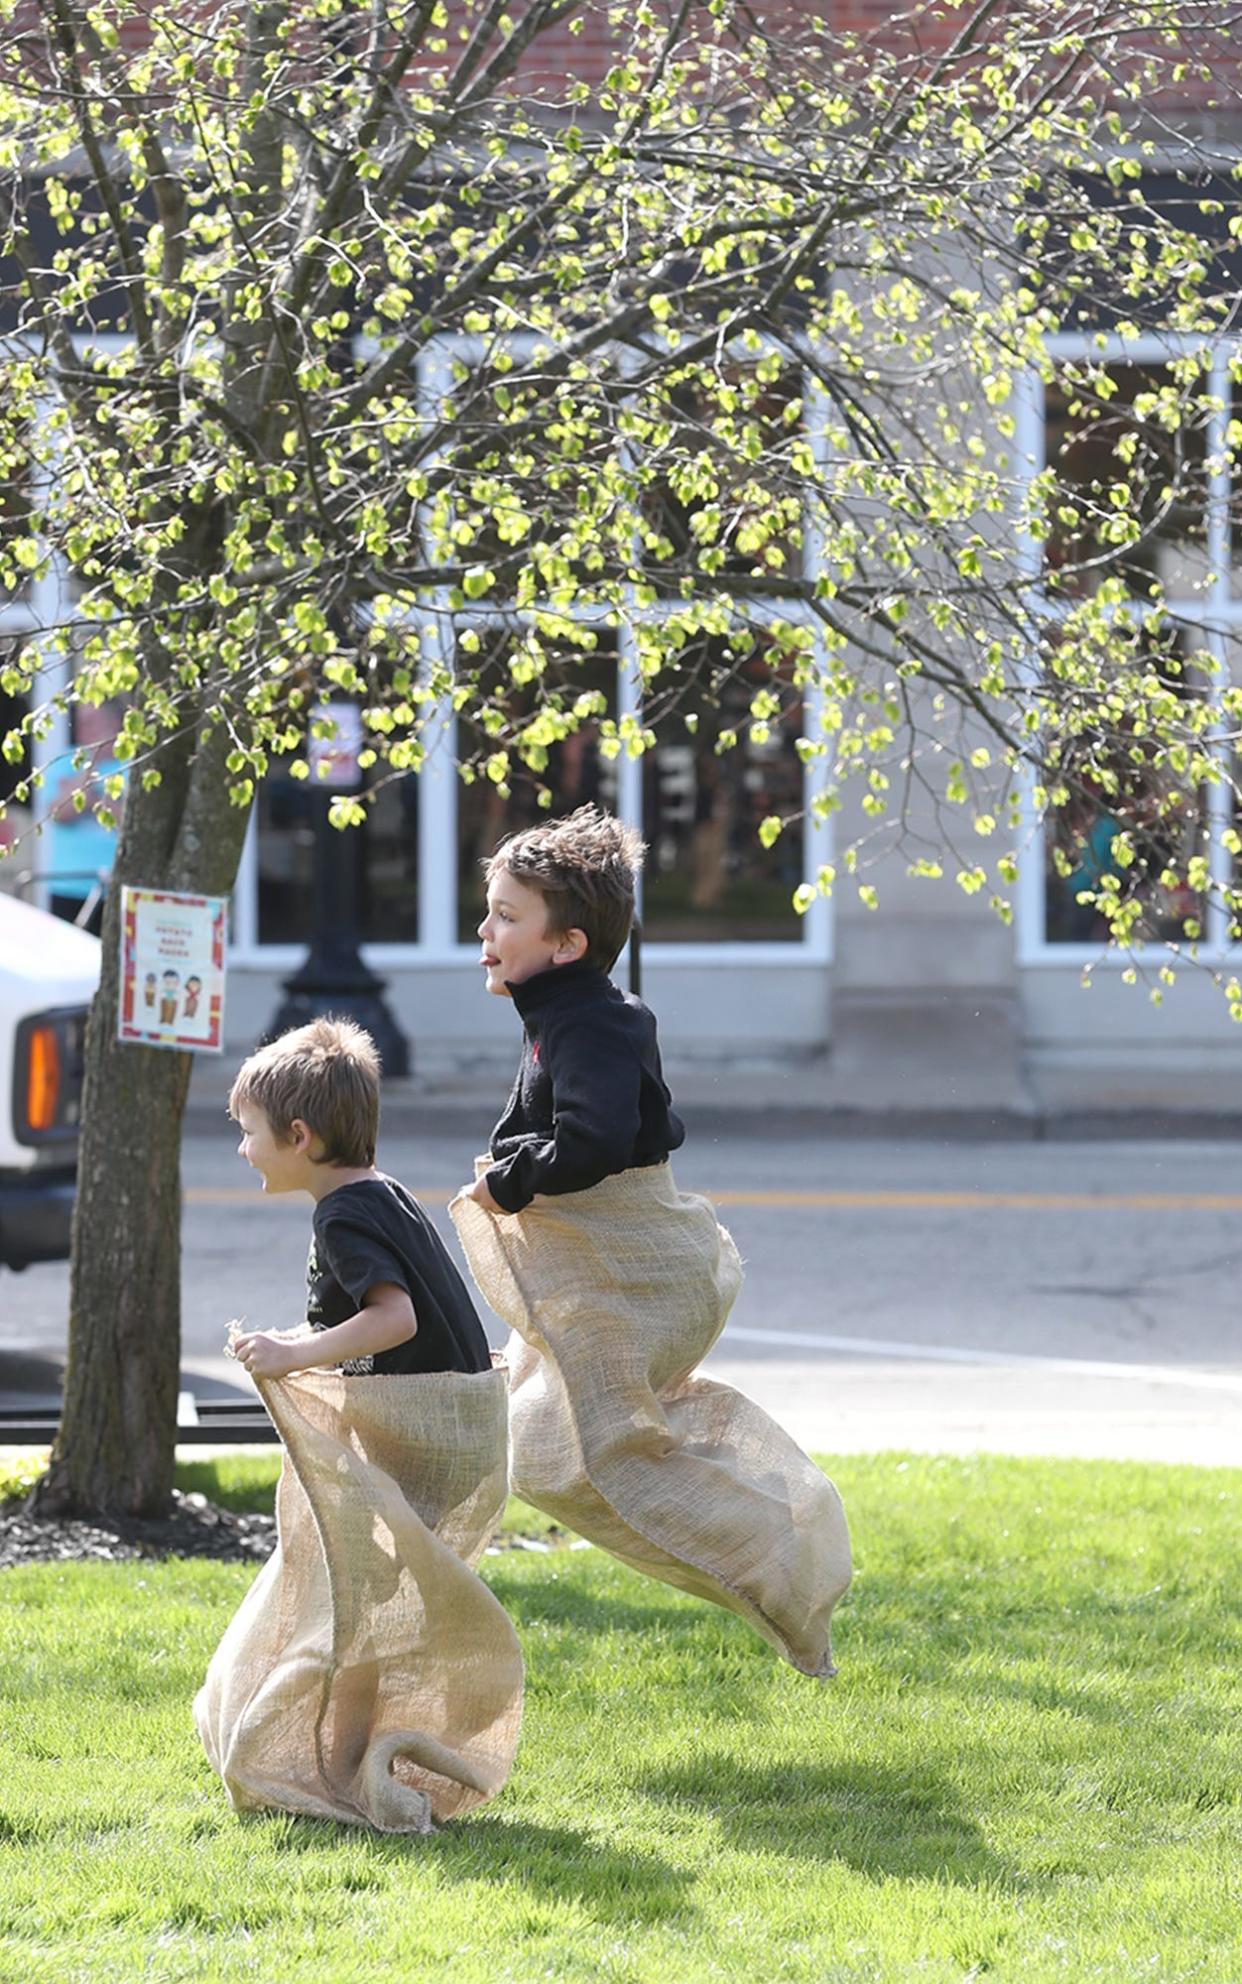 Jackson Lloyd, 4, and his brother Quentin, 6, take part in a potato sack race at the Ravenna Jo-Jo Fest Friday.